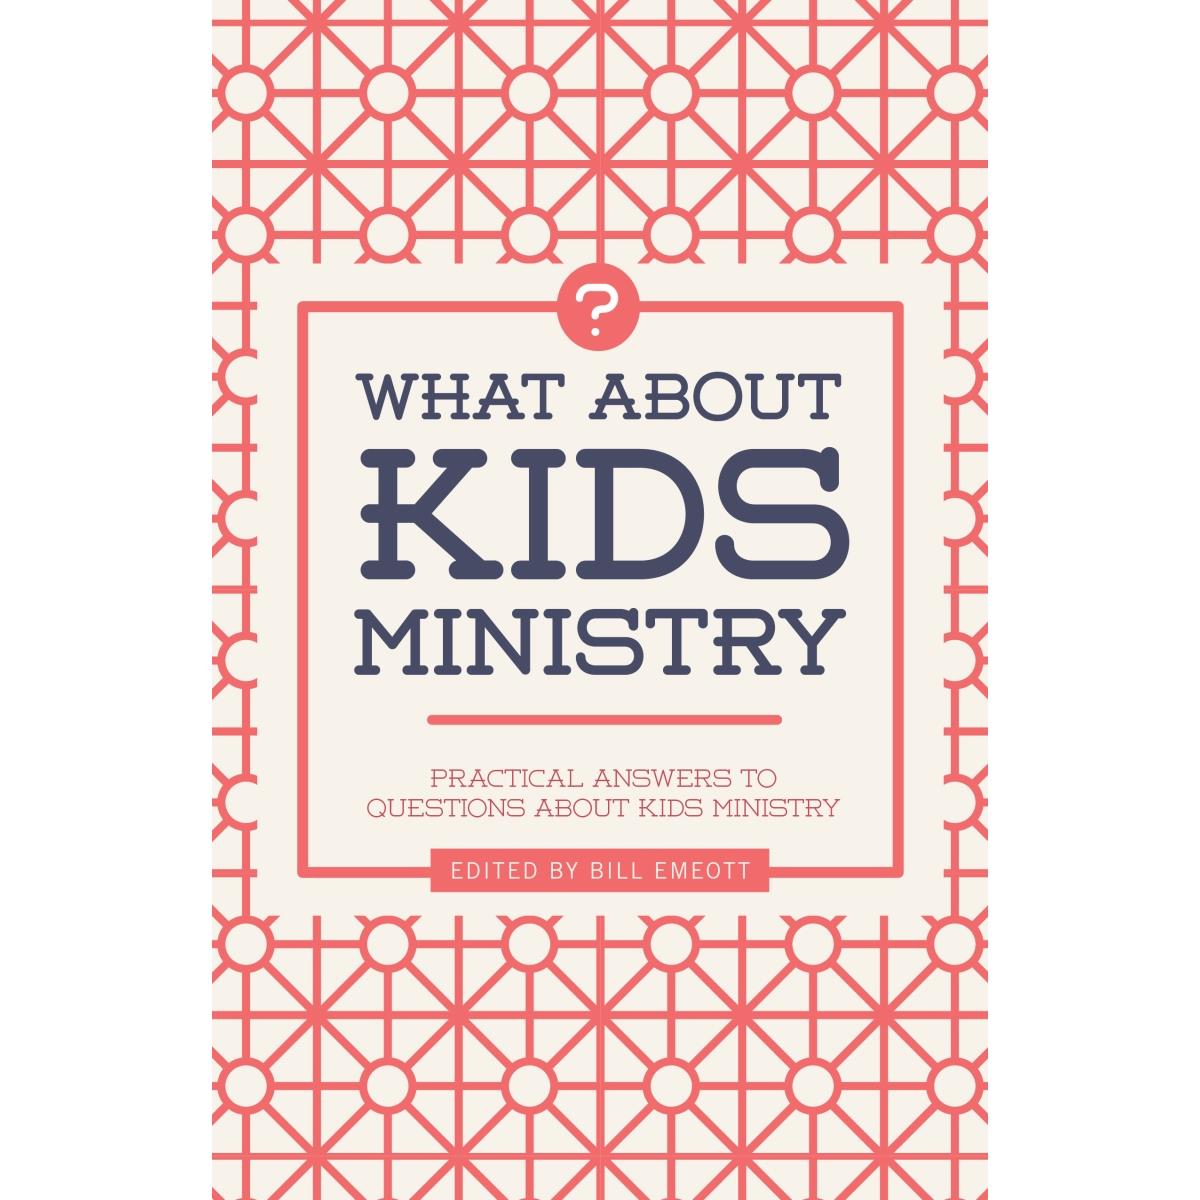 B & H Publishing 142371 What About Kids Ministry